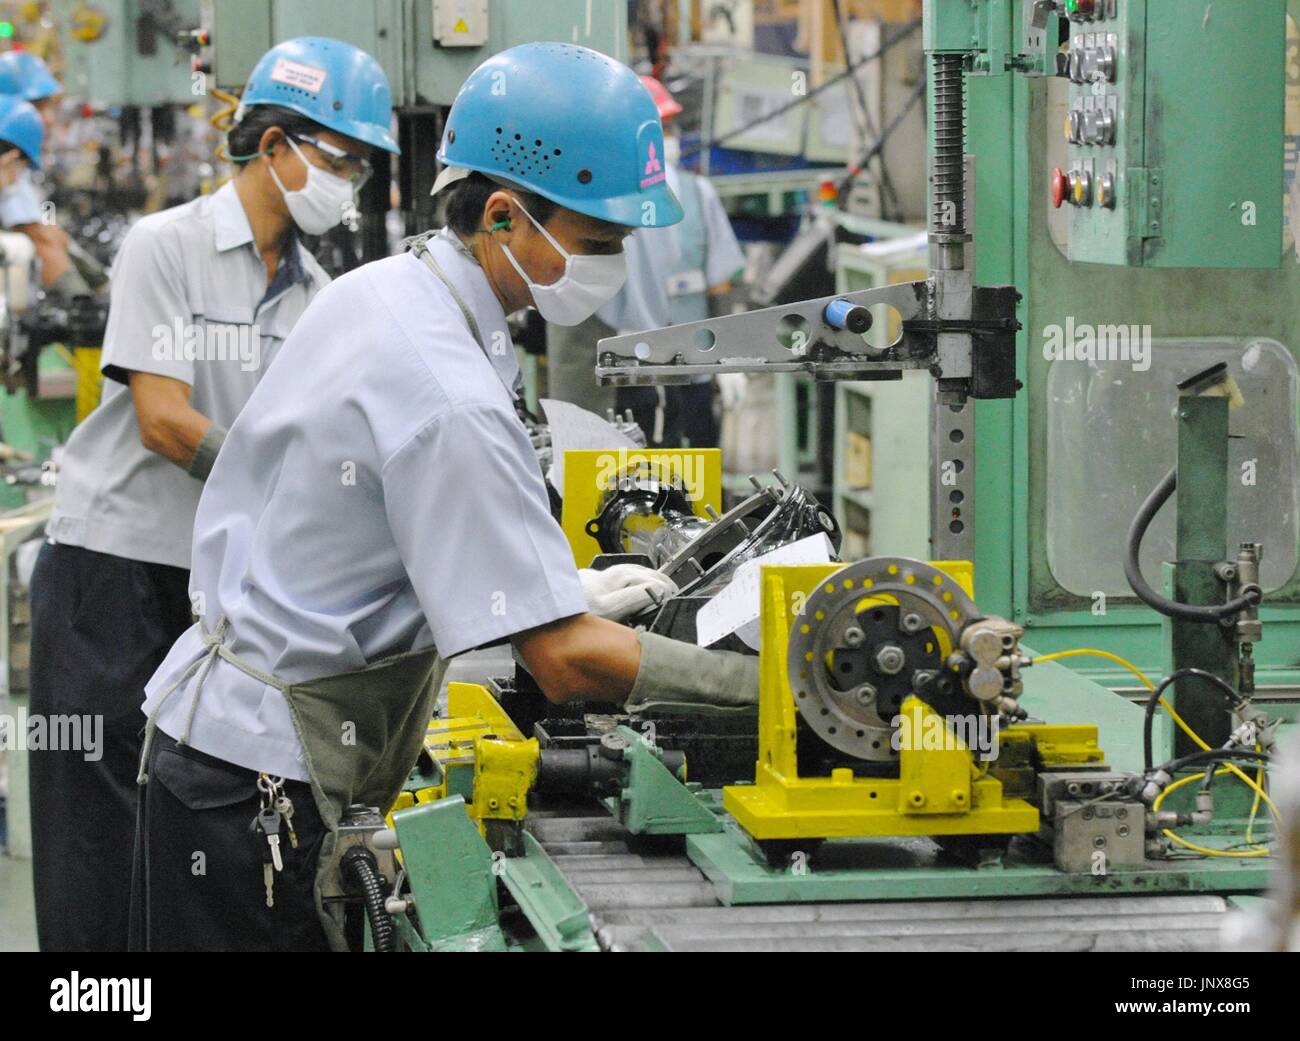 LAEM CHABANG, Thailand - Employees work at a plant of Japanese automaker Mitsubishi Motors Corp. in Laem Chabang, eastern Thailand, on Nov. 14, 2011. The plant resumed operations the same day after about a month of suspension due to supply chain disruption caused by the flooding in Thailand. (Kyodo) Stock Photo